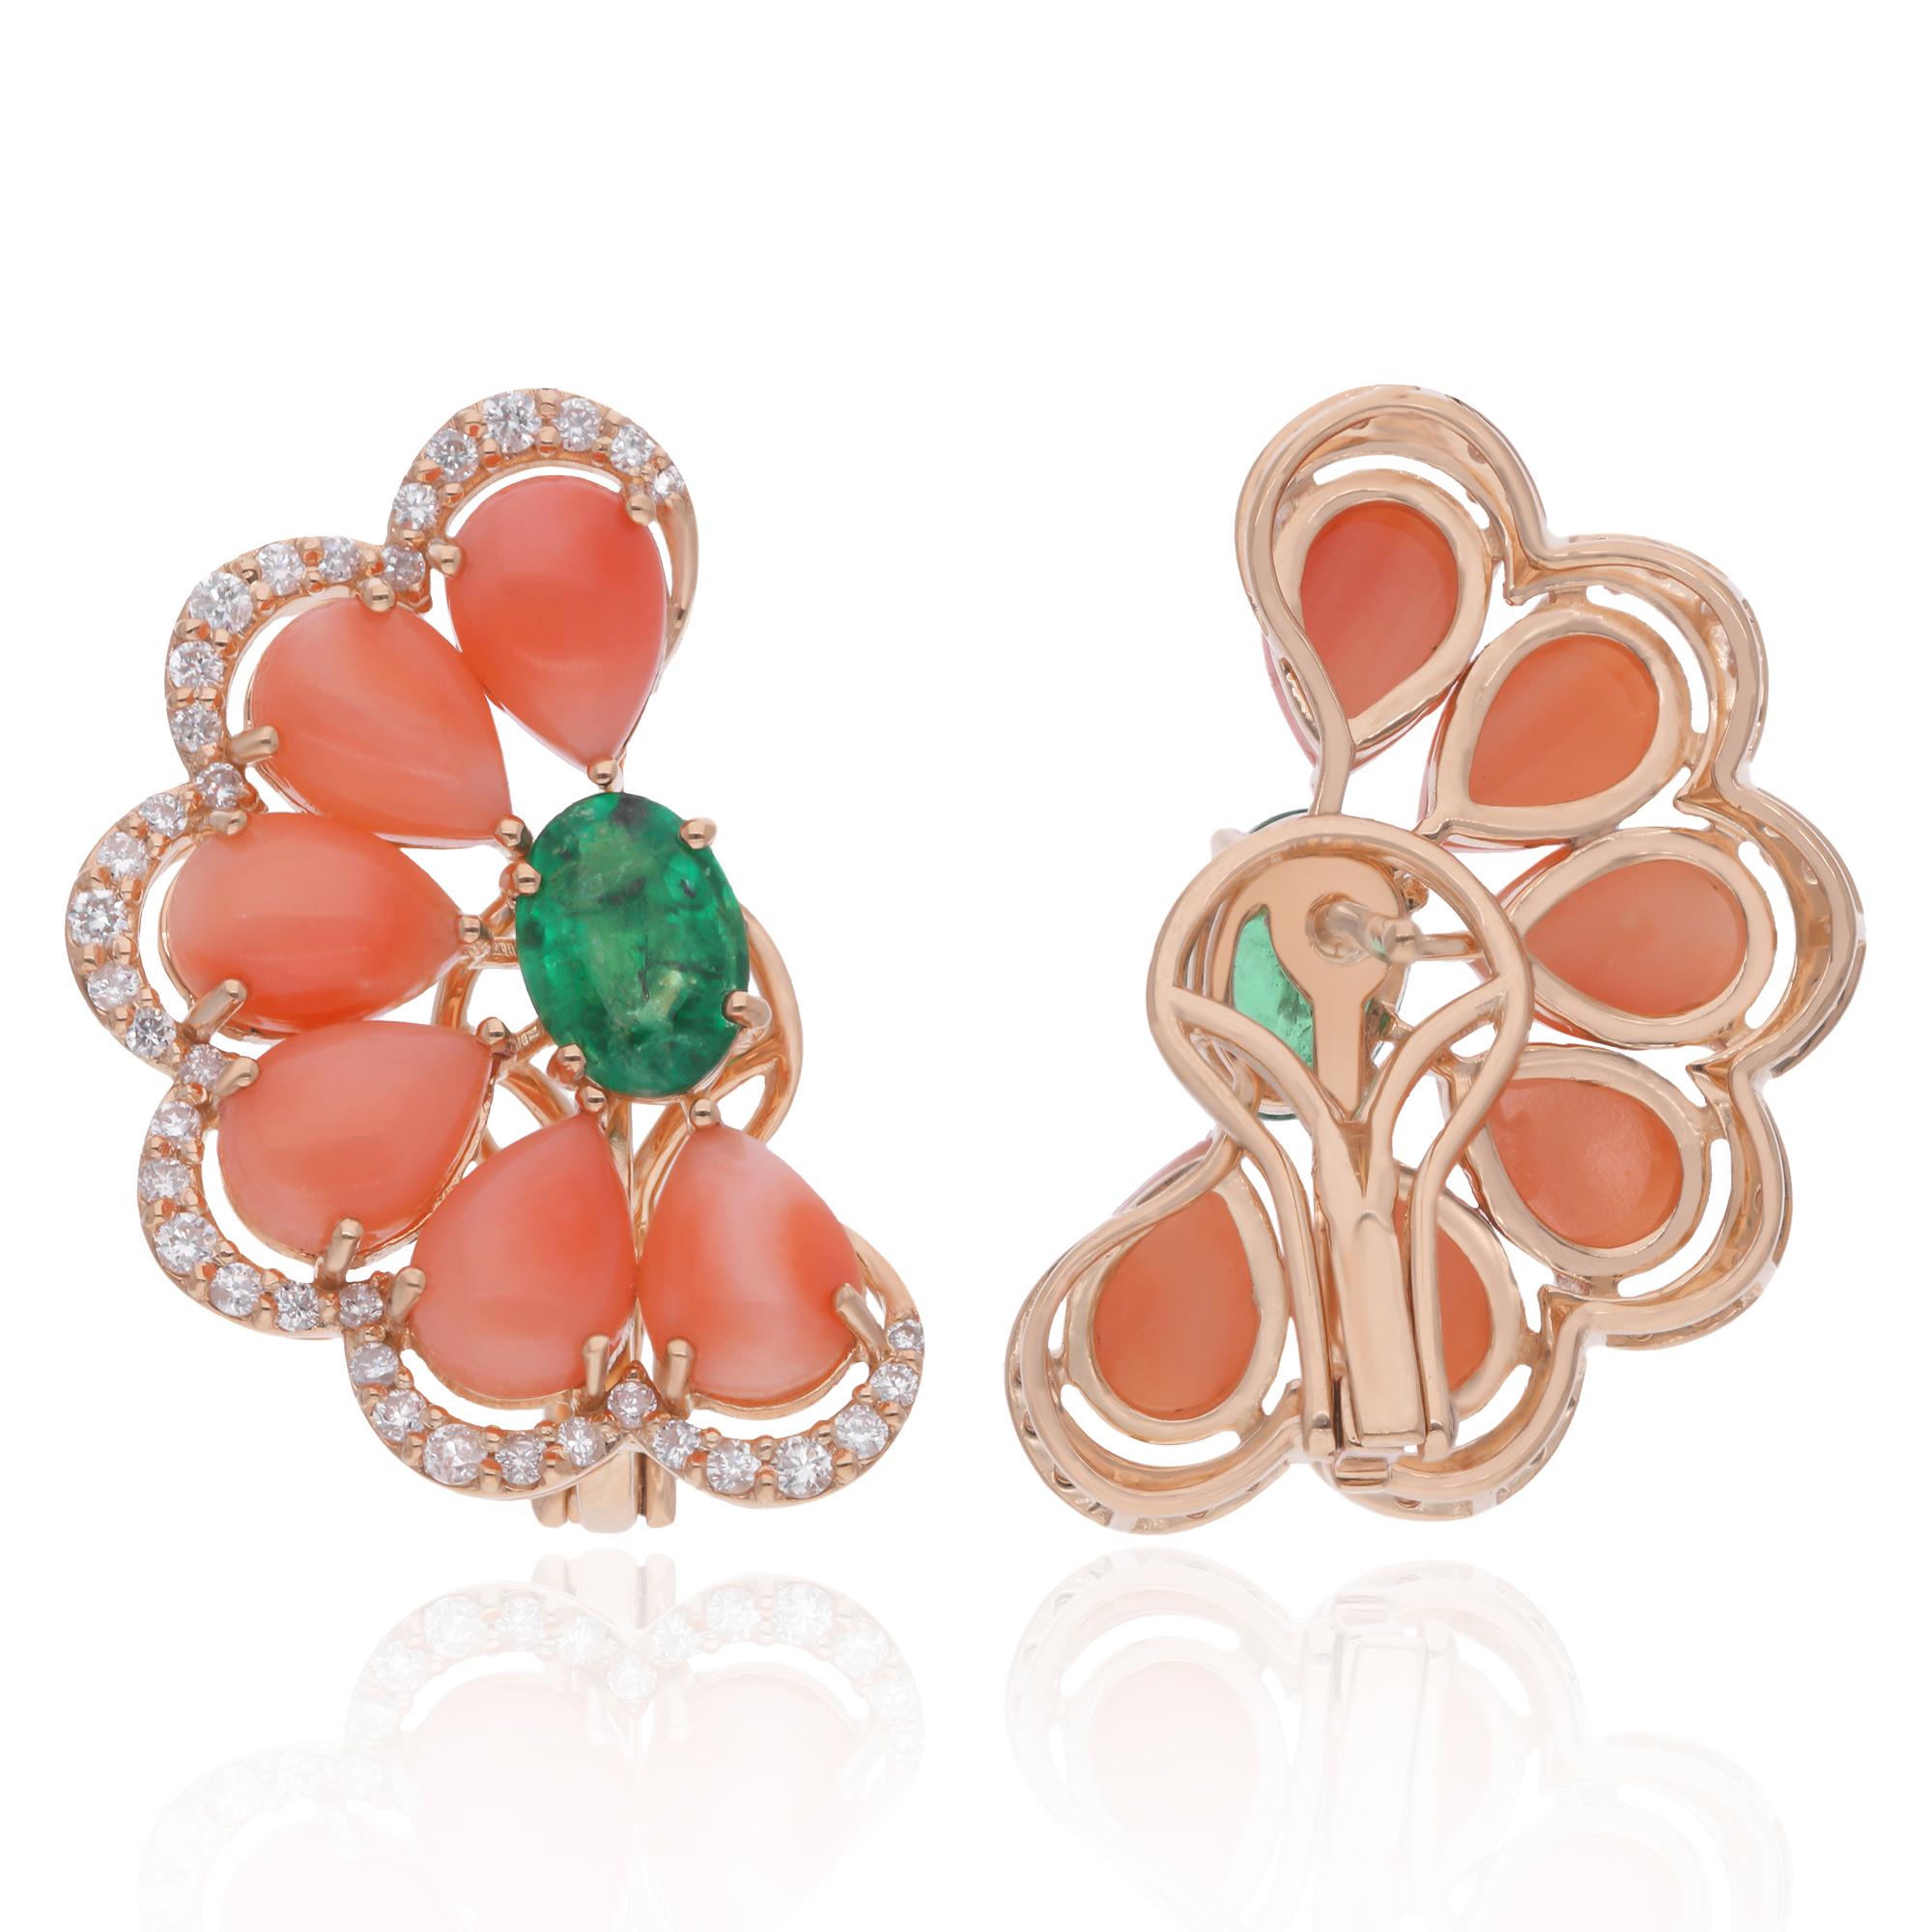 Infuse your look with vibrant elegance wearing these pear coral gemstone stud earrings adorned with emerald and diamond accents, meticulously crafted in 14 karat yellow gold. A harmonious blend of color and sparkle, these earrings exude